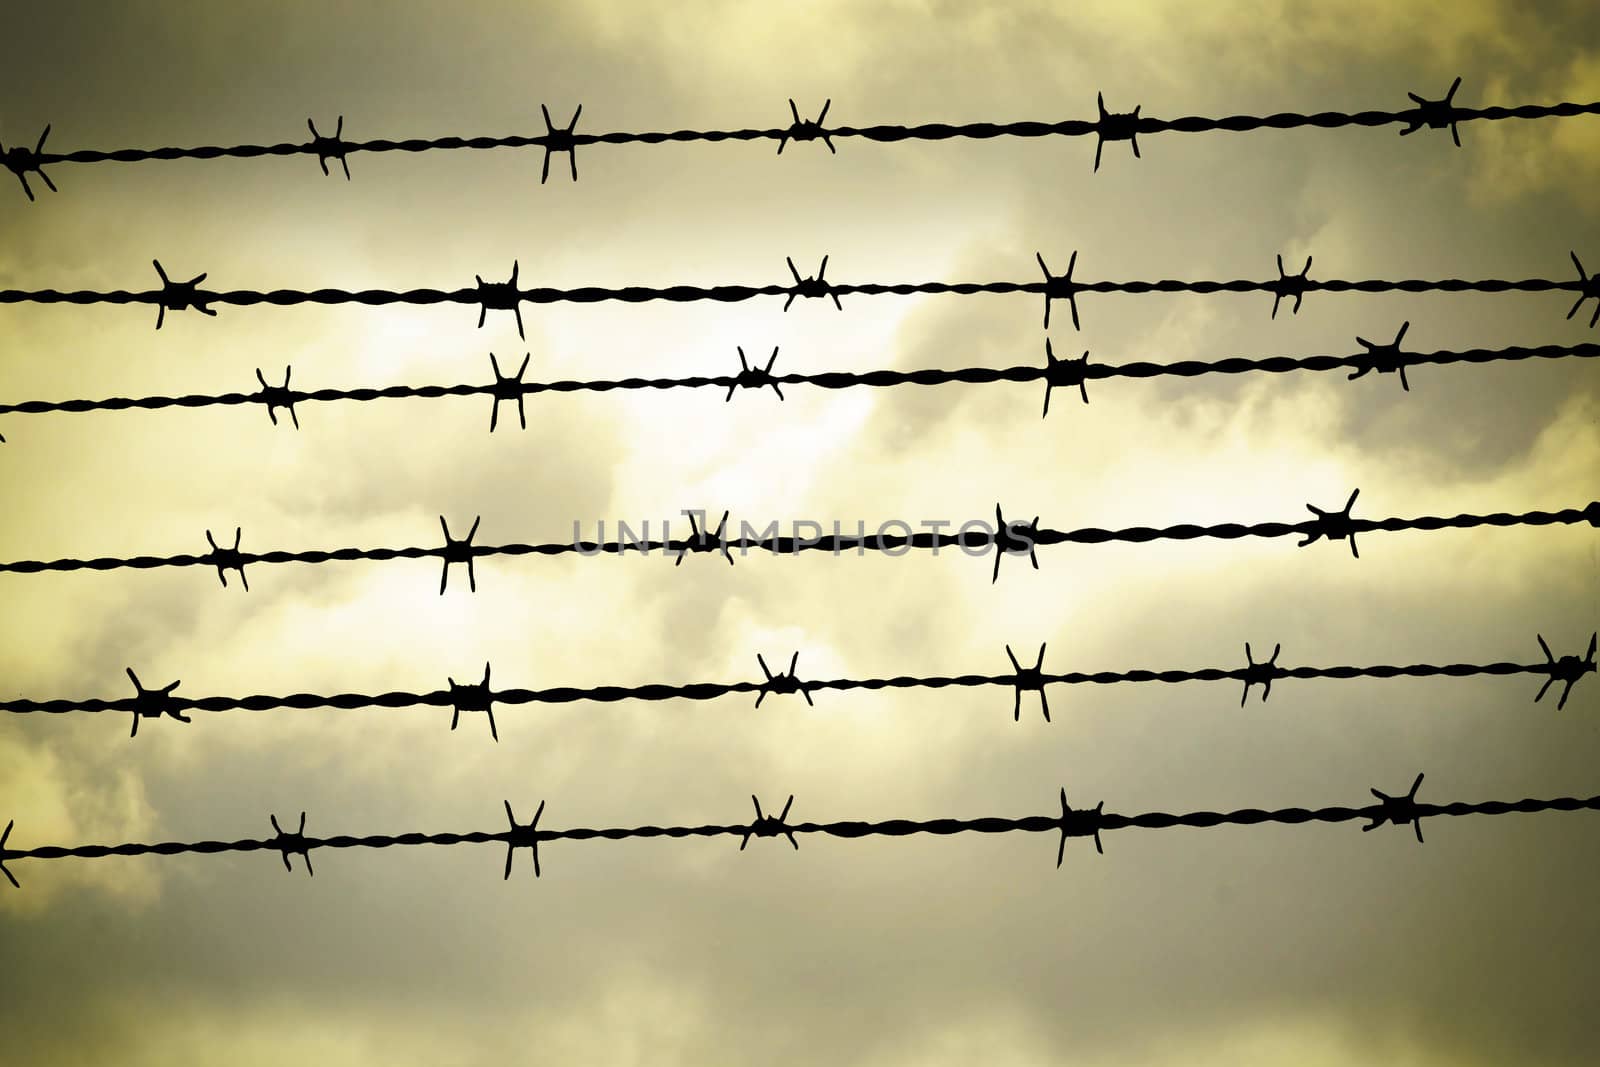 Barbed wire by Hasenonkel